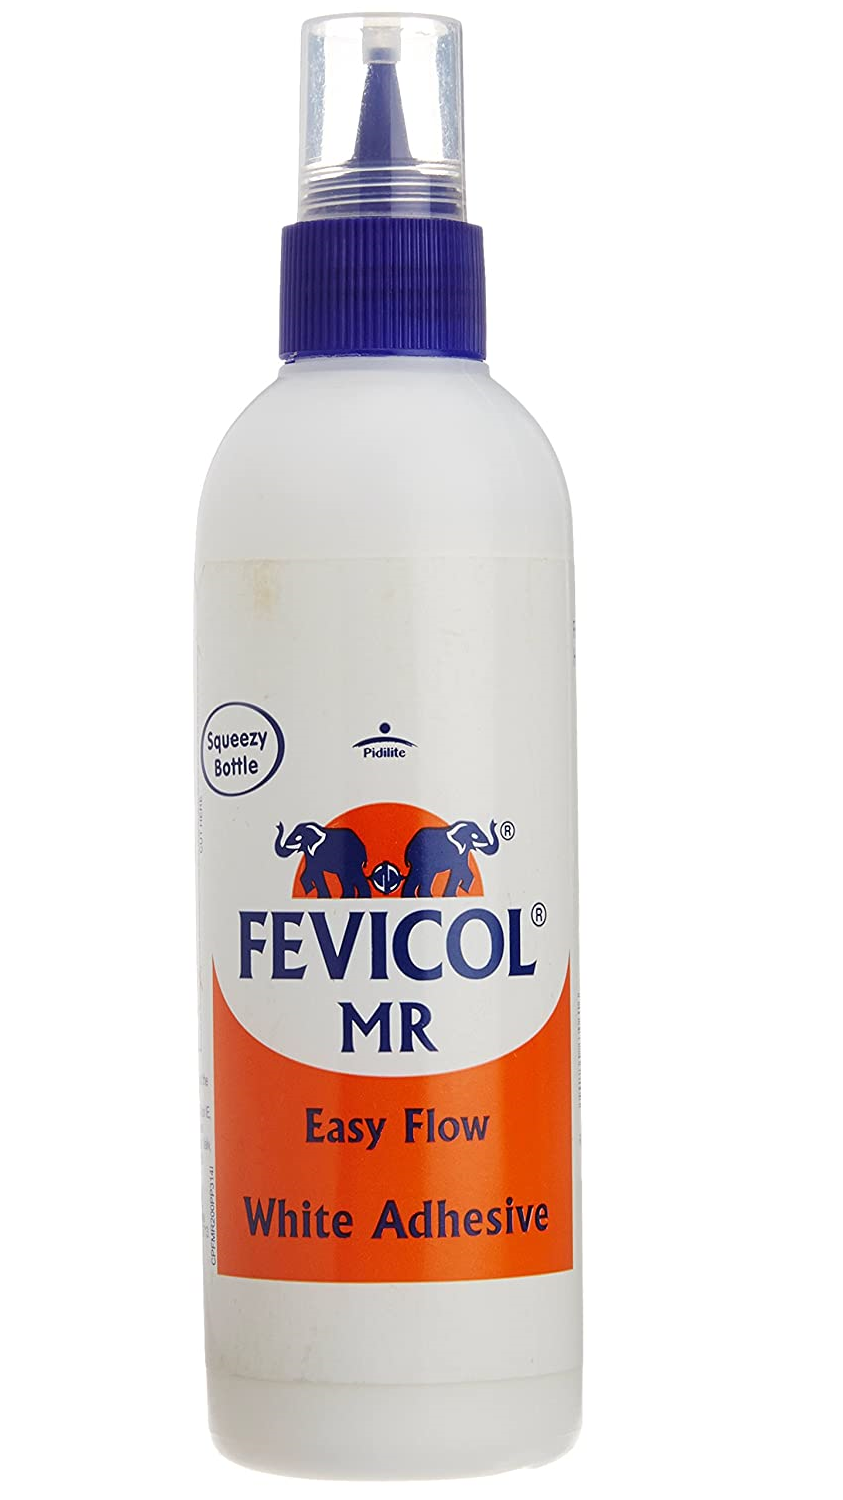 Fevicol MR Squeeze Bottle, 100 grams